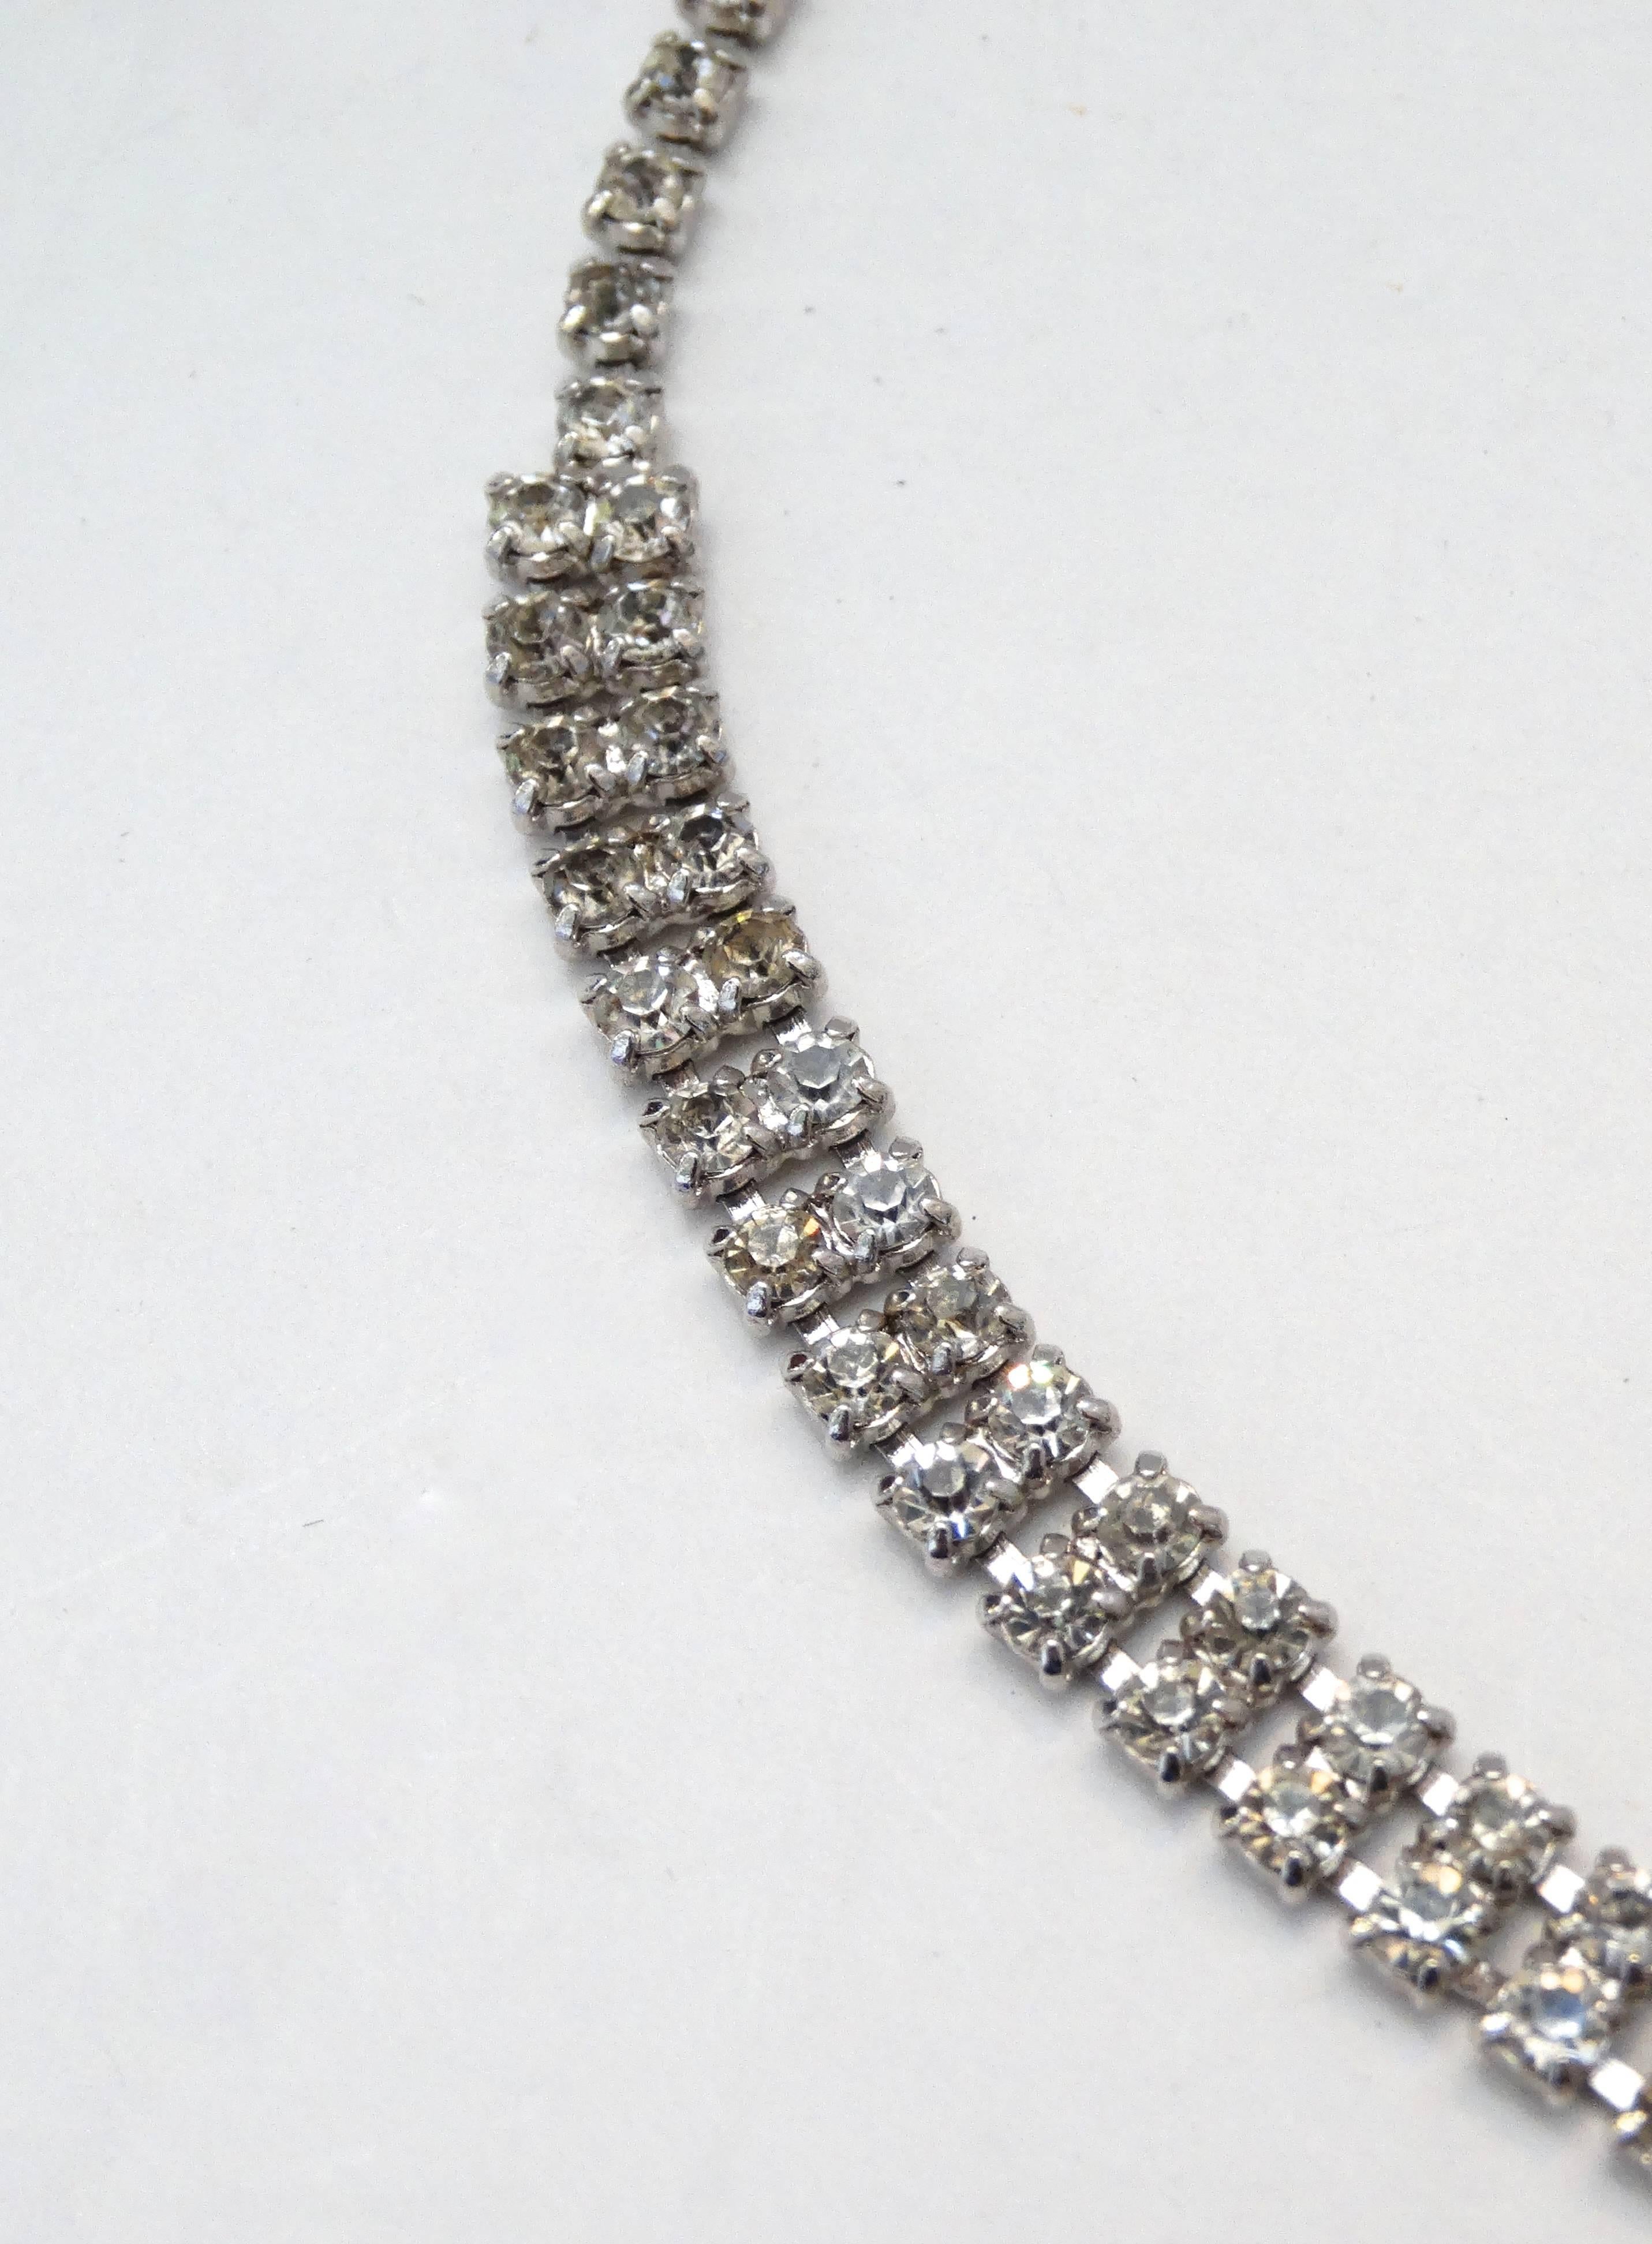 Channel the glamour of the 1960s with this adorable rhinestone pendant necklace! Made of beautifully cut rhinestone gems in various shapes and sizes backed with a quality silver metal. Large bow-like pendant sits at the center. Wears close to the